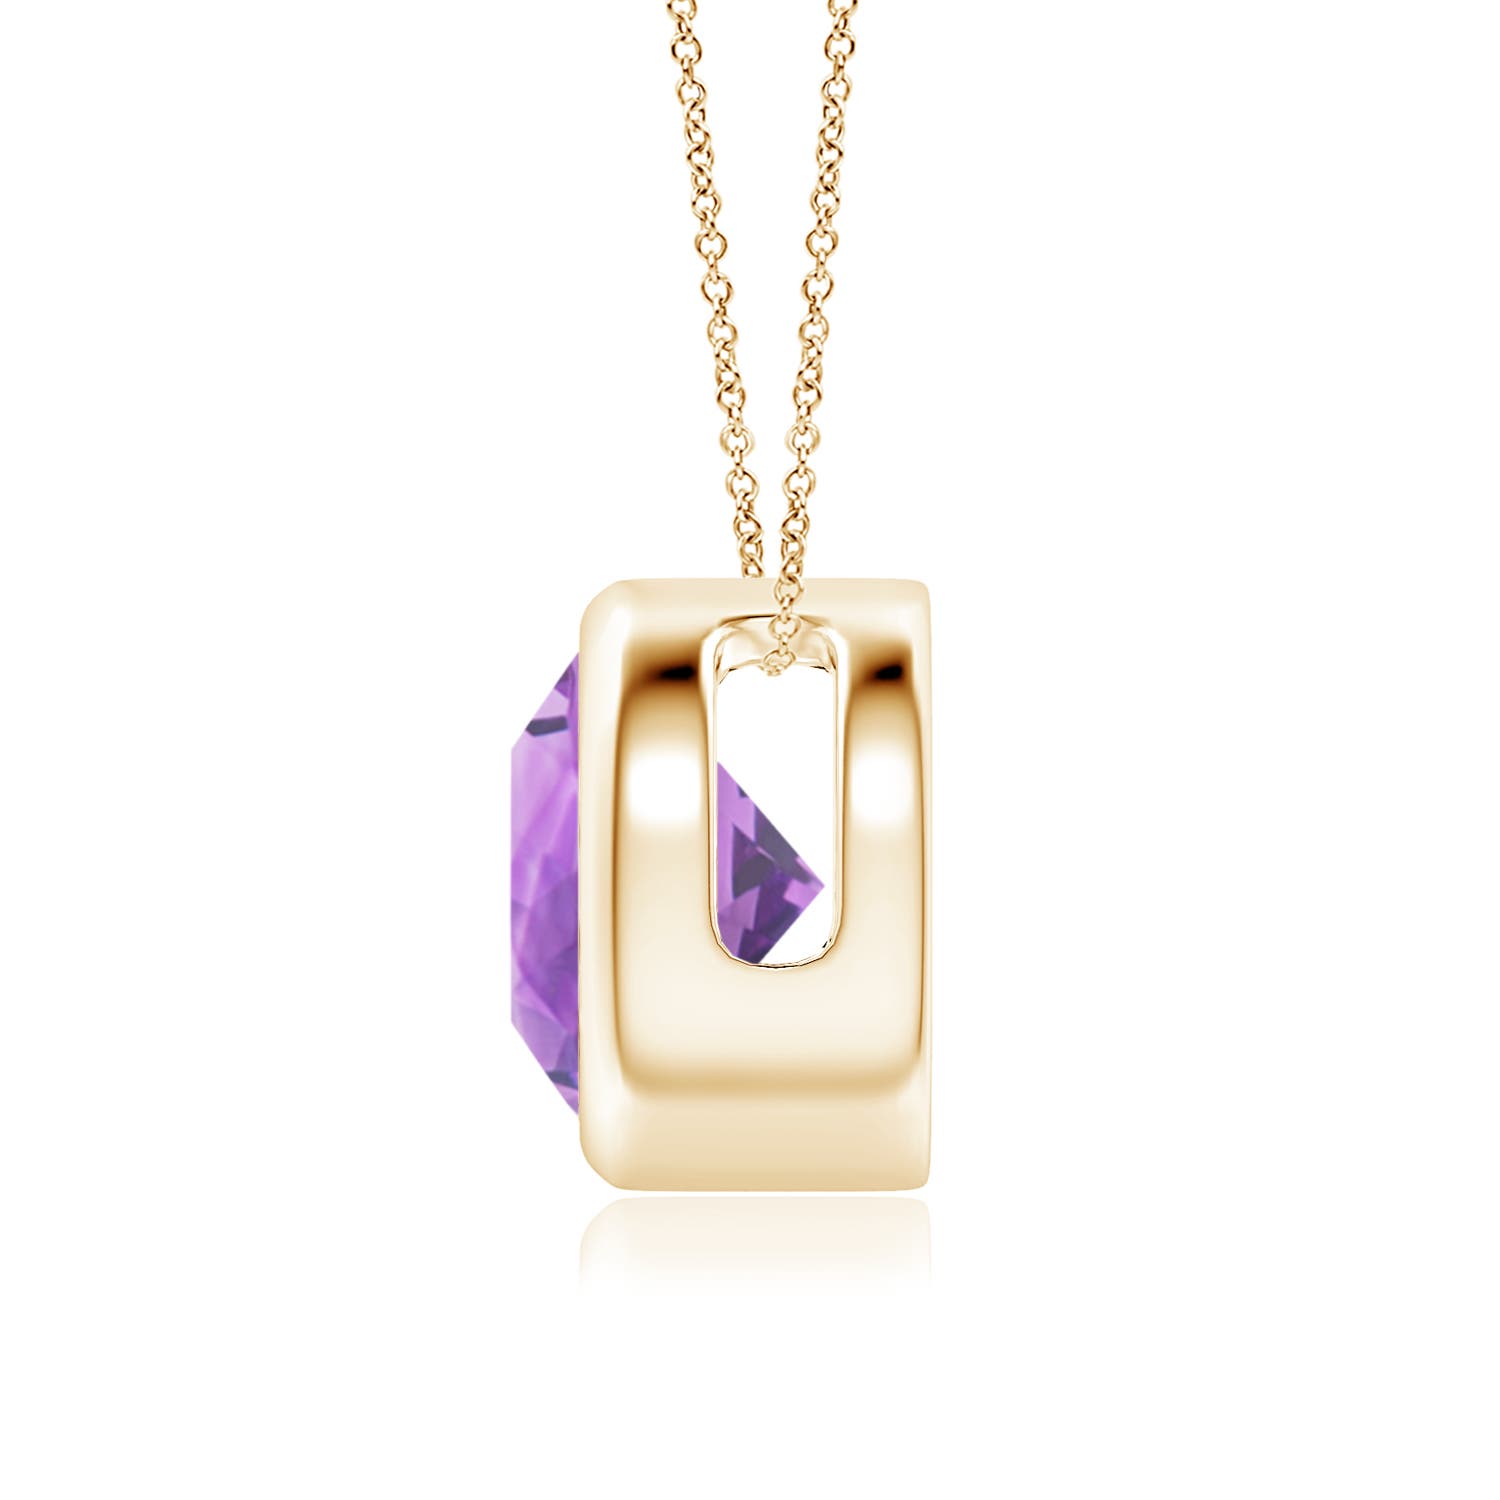 A - Amethyst / 1.7 CT / 14 KT Yellow Gold